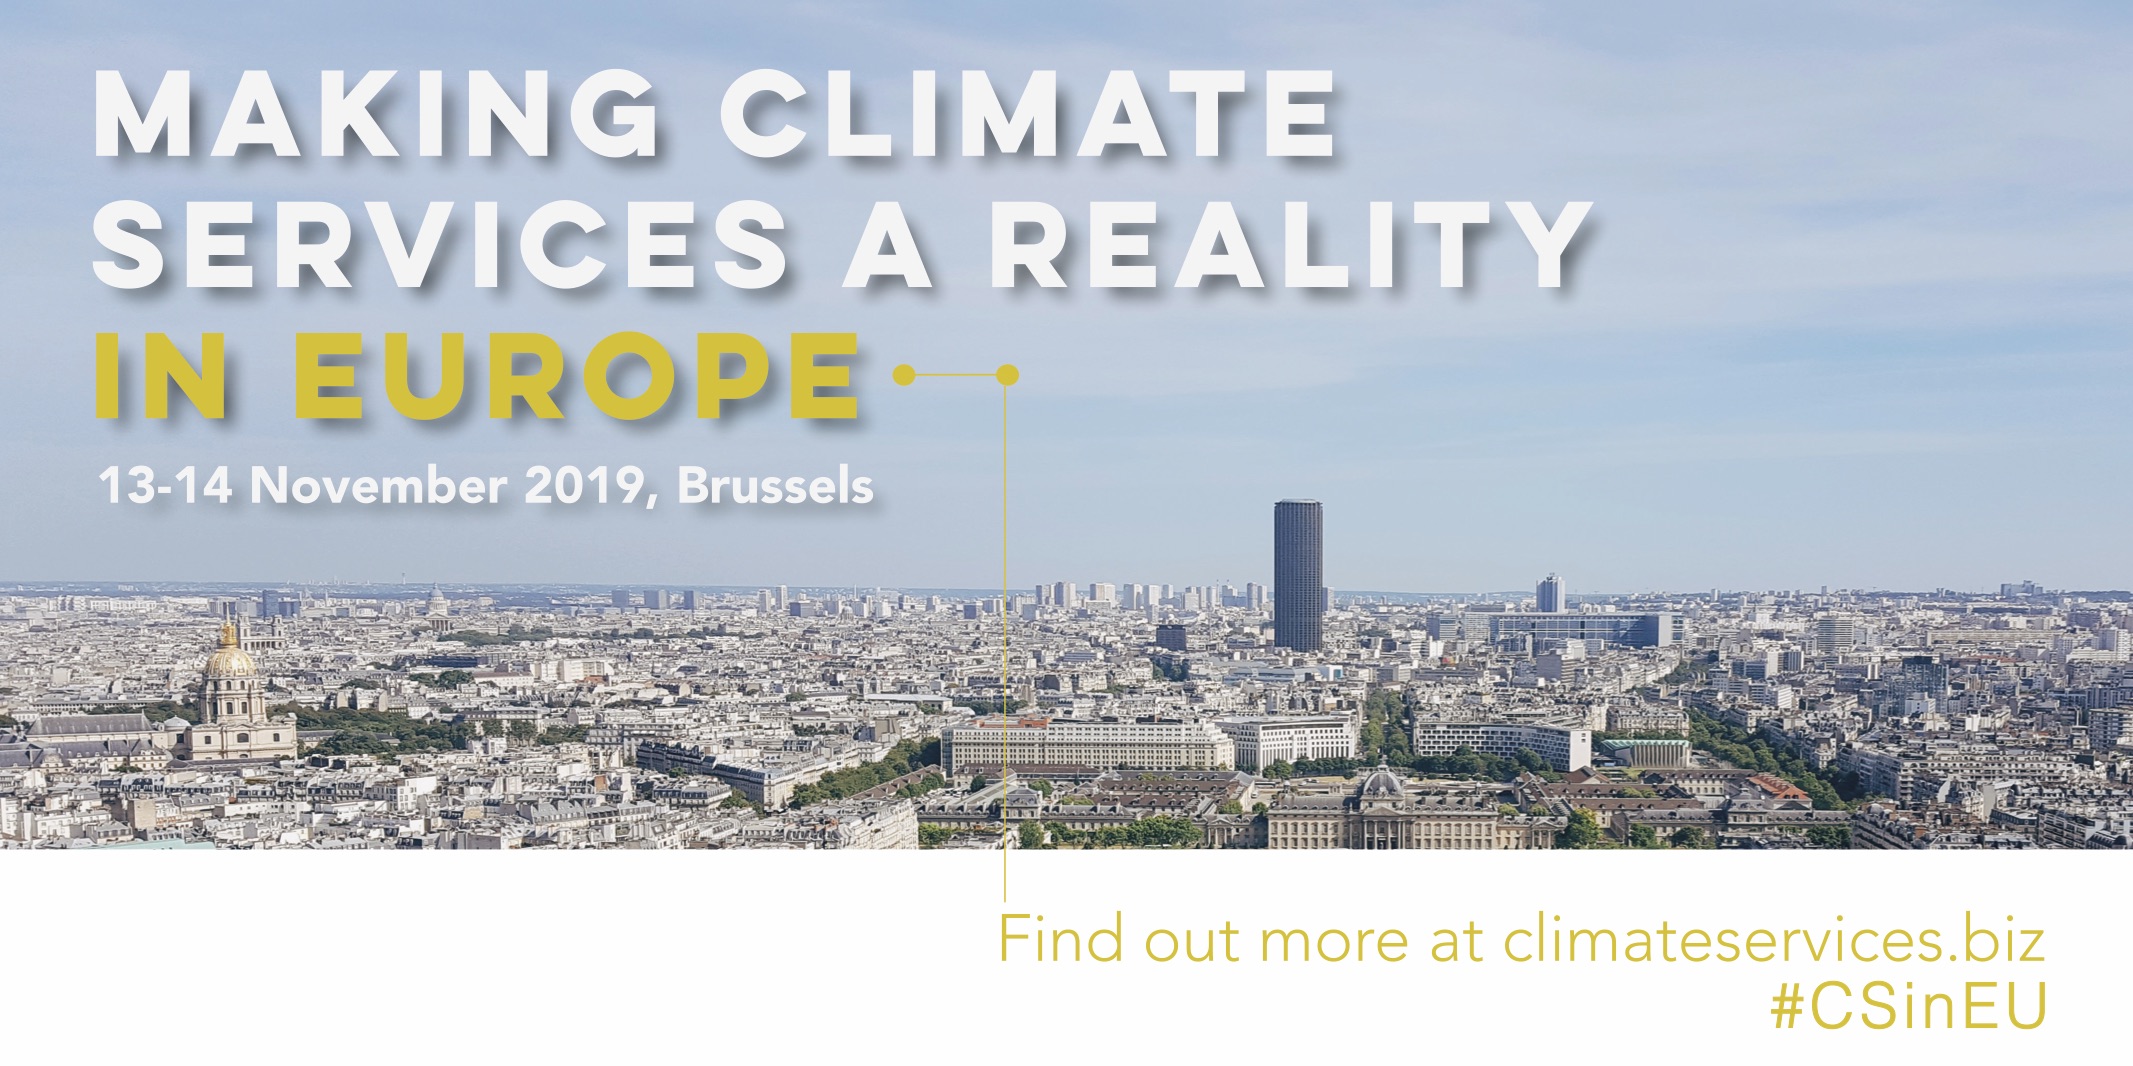 Making climate services a reality in Europe